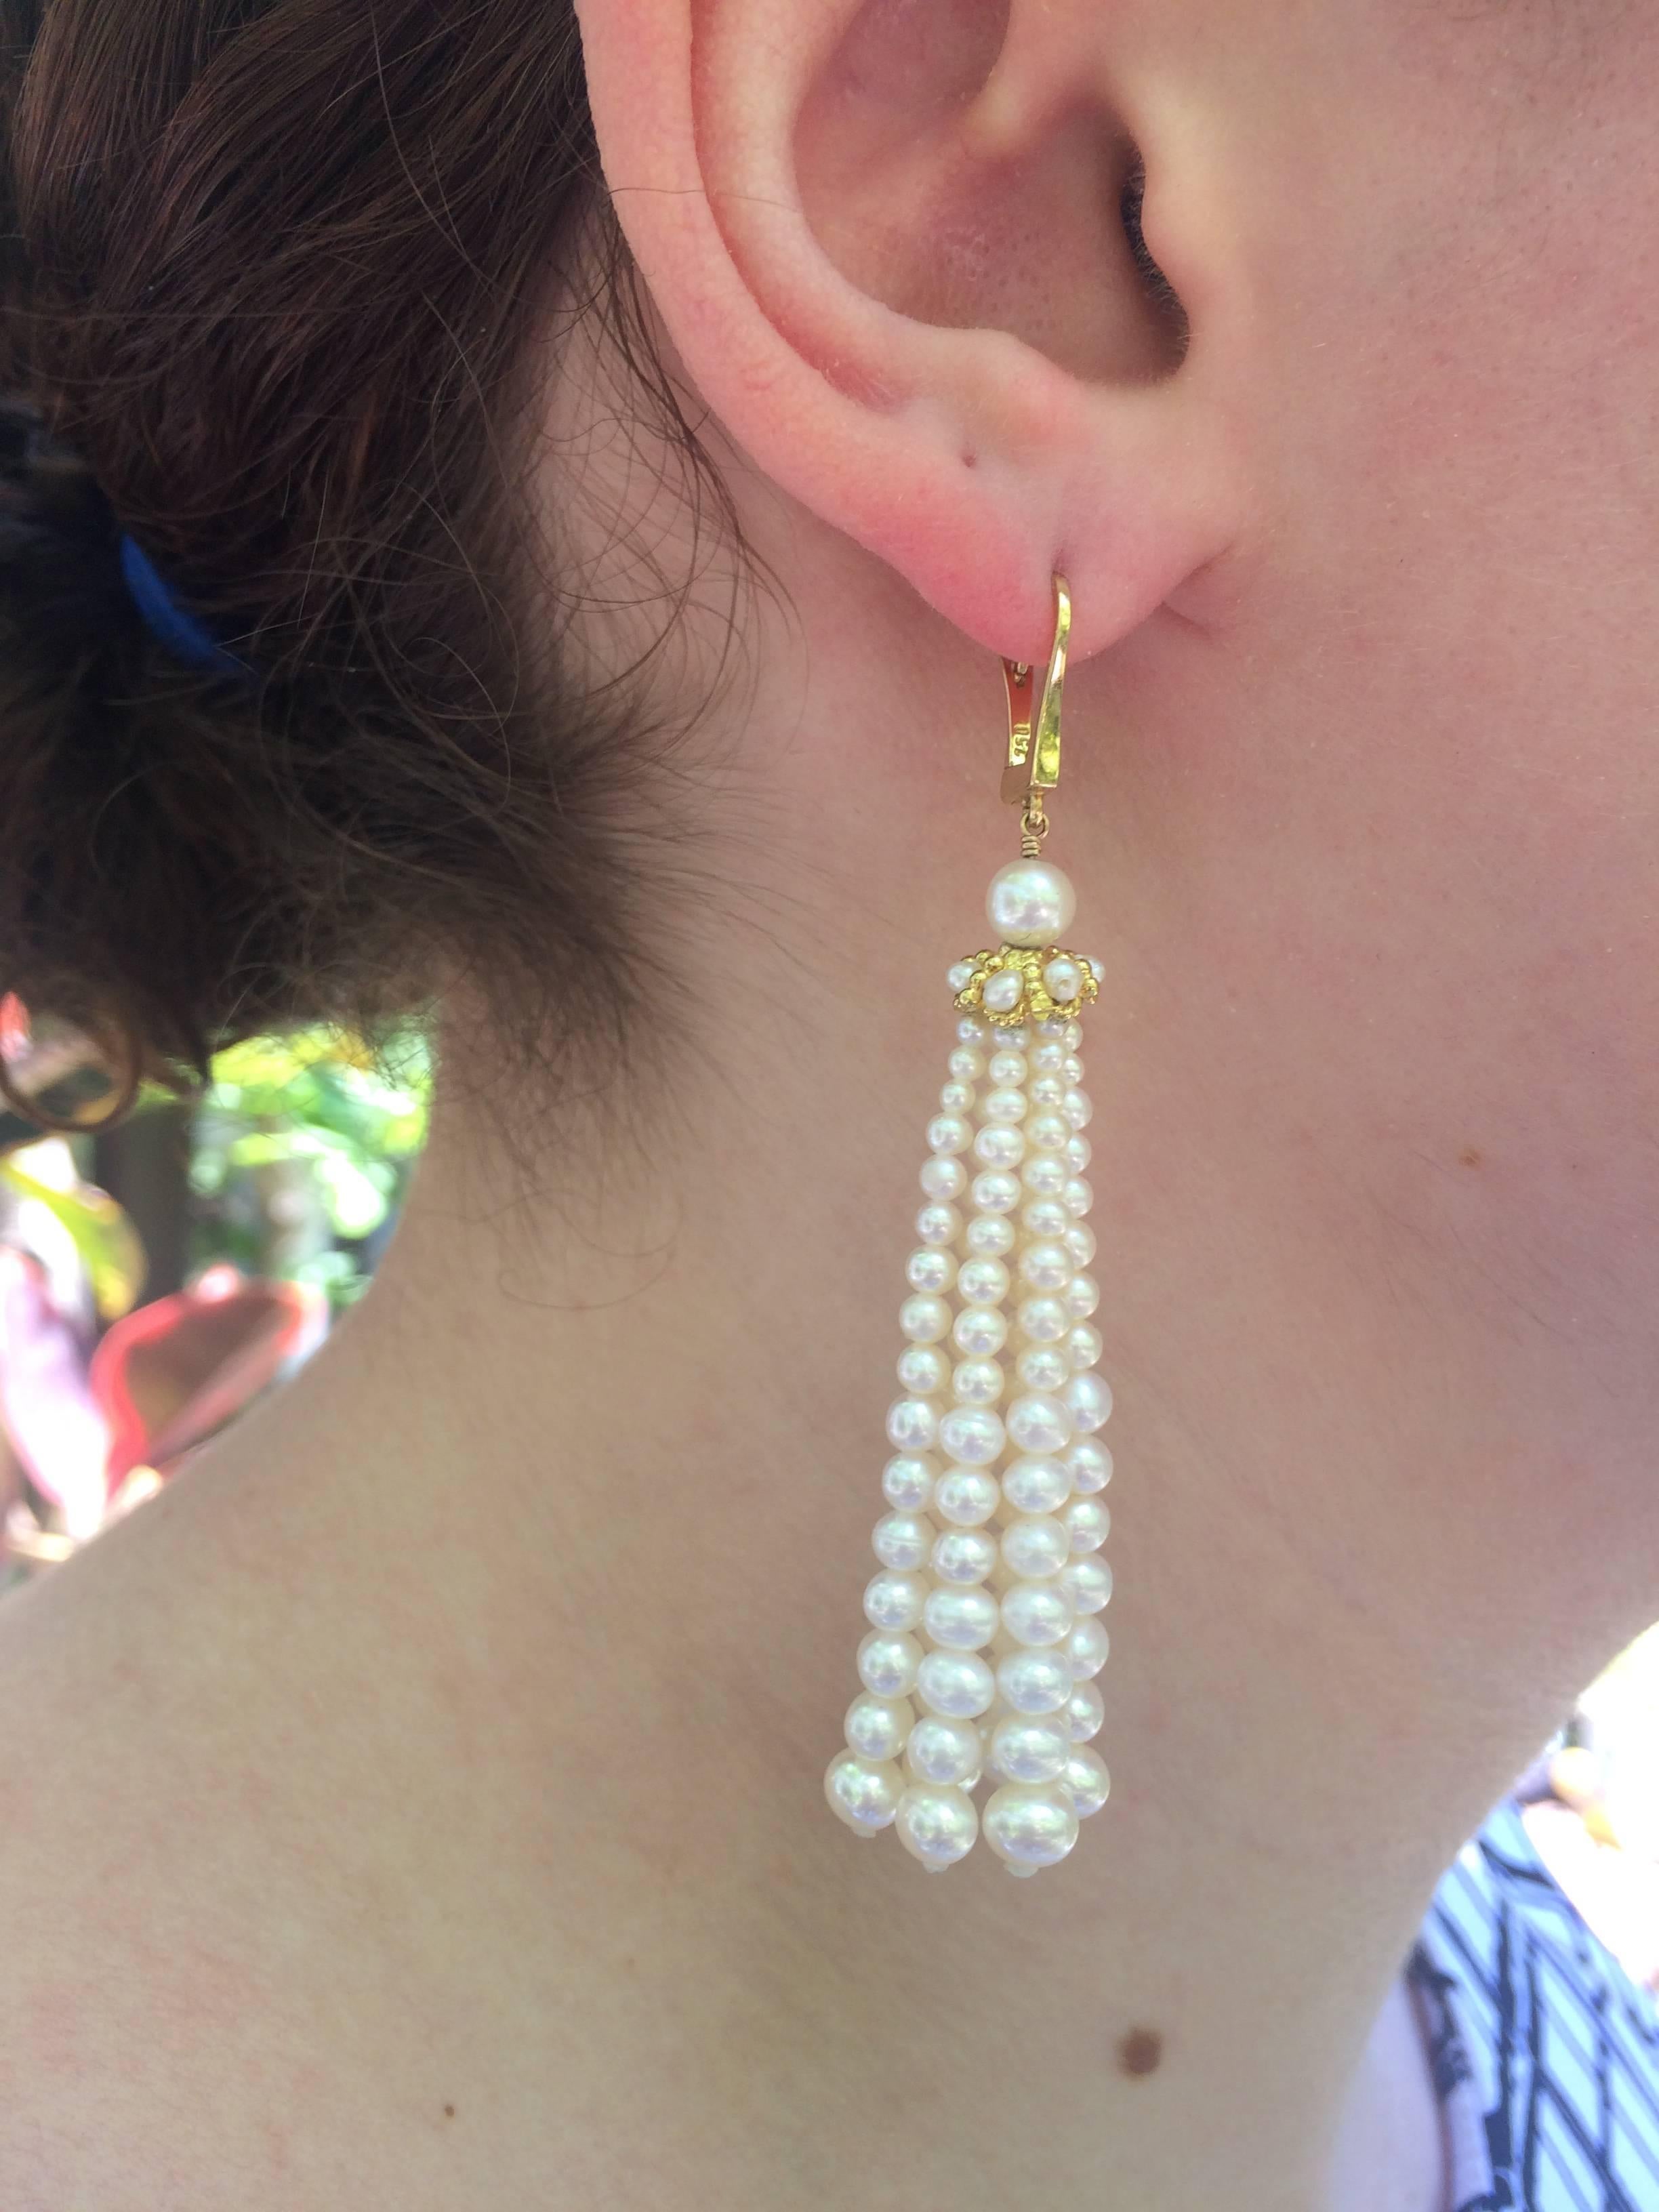 Graduated fine cultured pearl earrings measures 3 inches from top of ear wire. Pearl strands hang from yellow gold cups detailed with pearls. 14 k yellow gold ear wires.